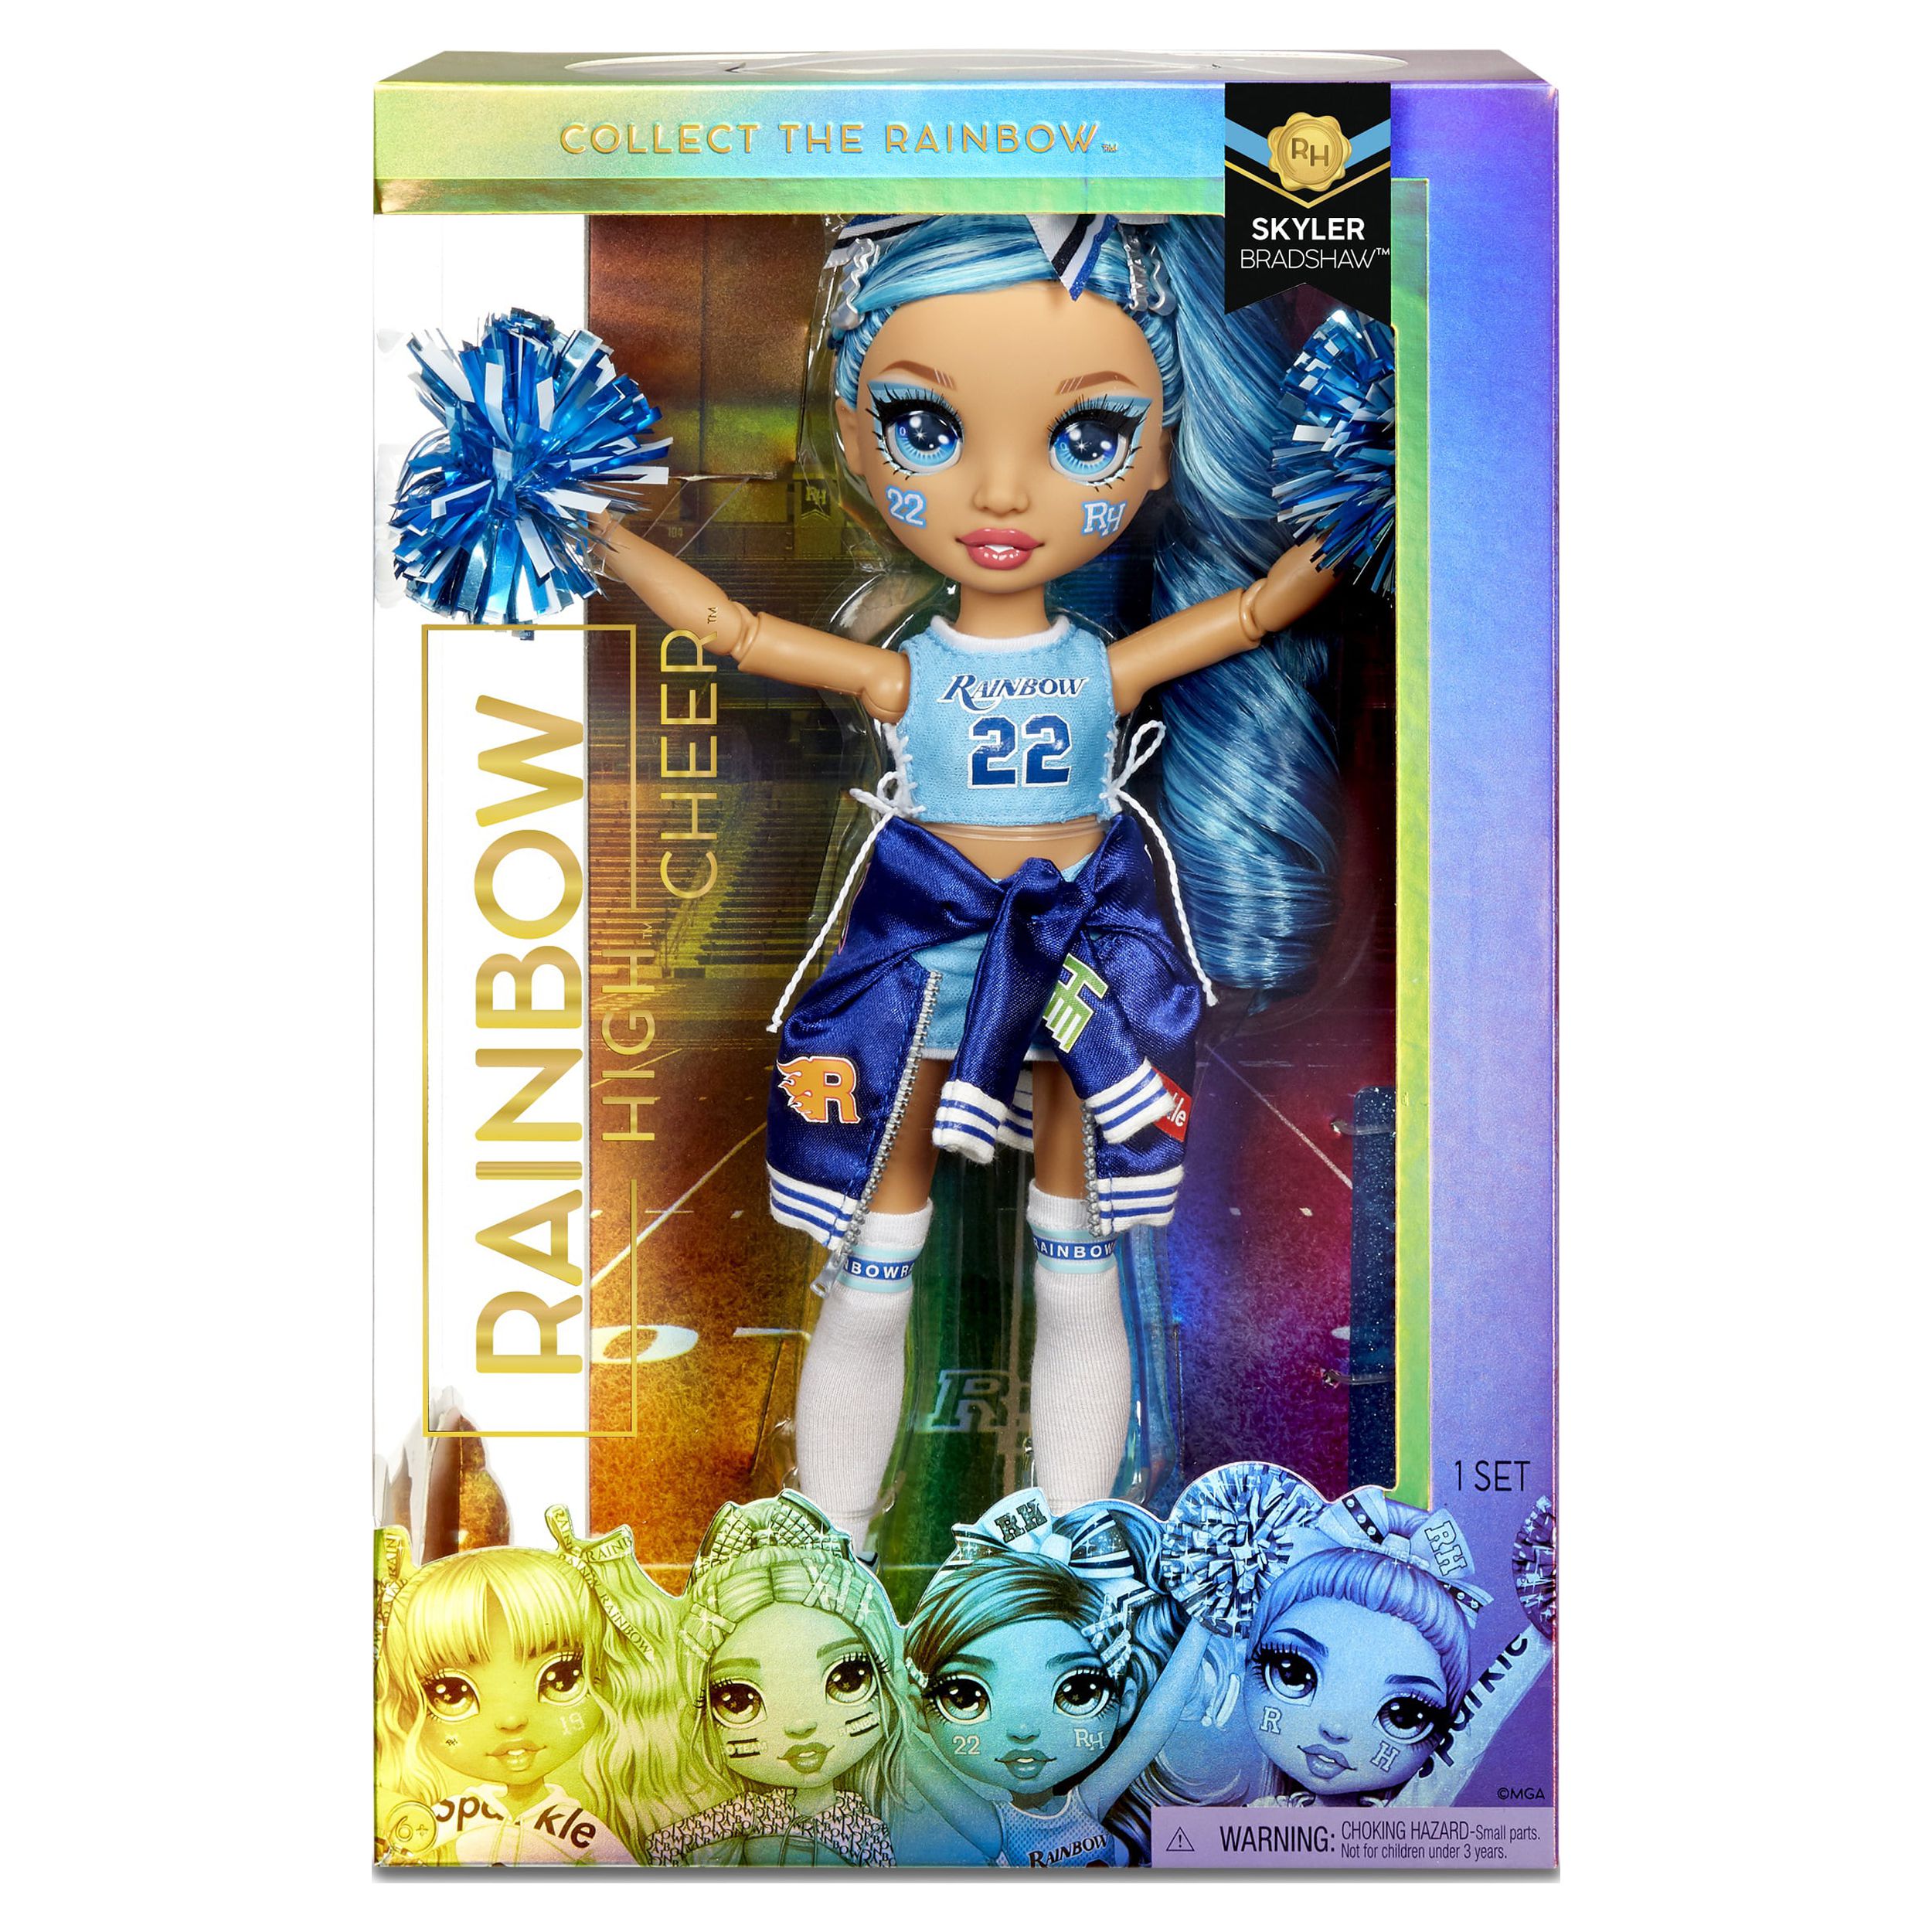 Rainbow High Cheer Skyler Bradshaw – Blue Fashion Doll with Pom Poms, Cheerleader Doll, Toys for Kids 6-12 Years Old - image 3 of 8